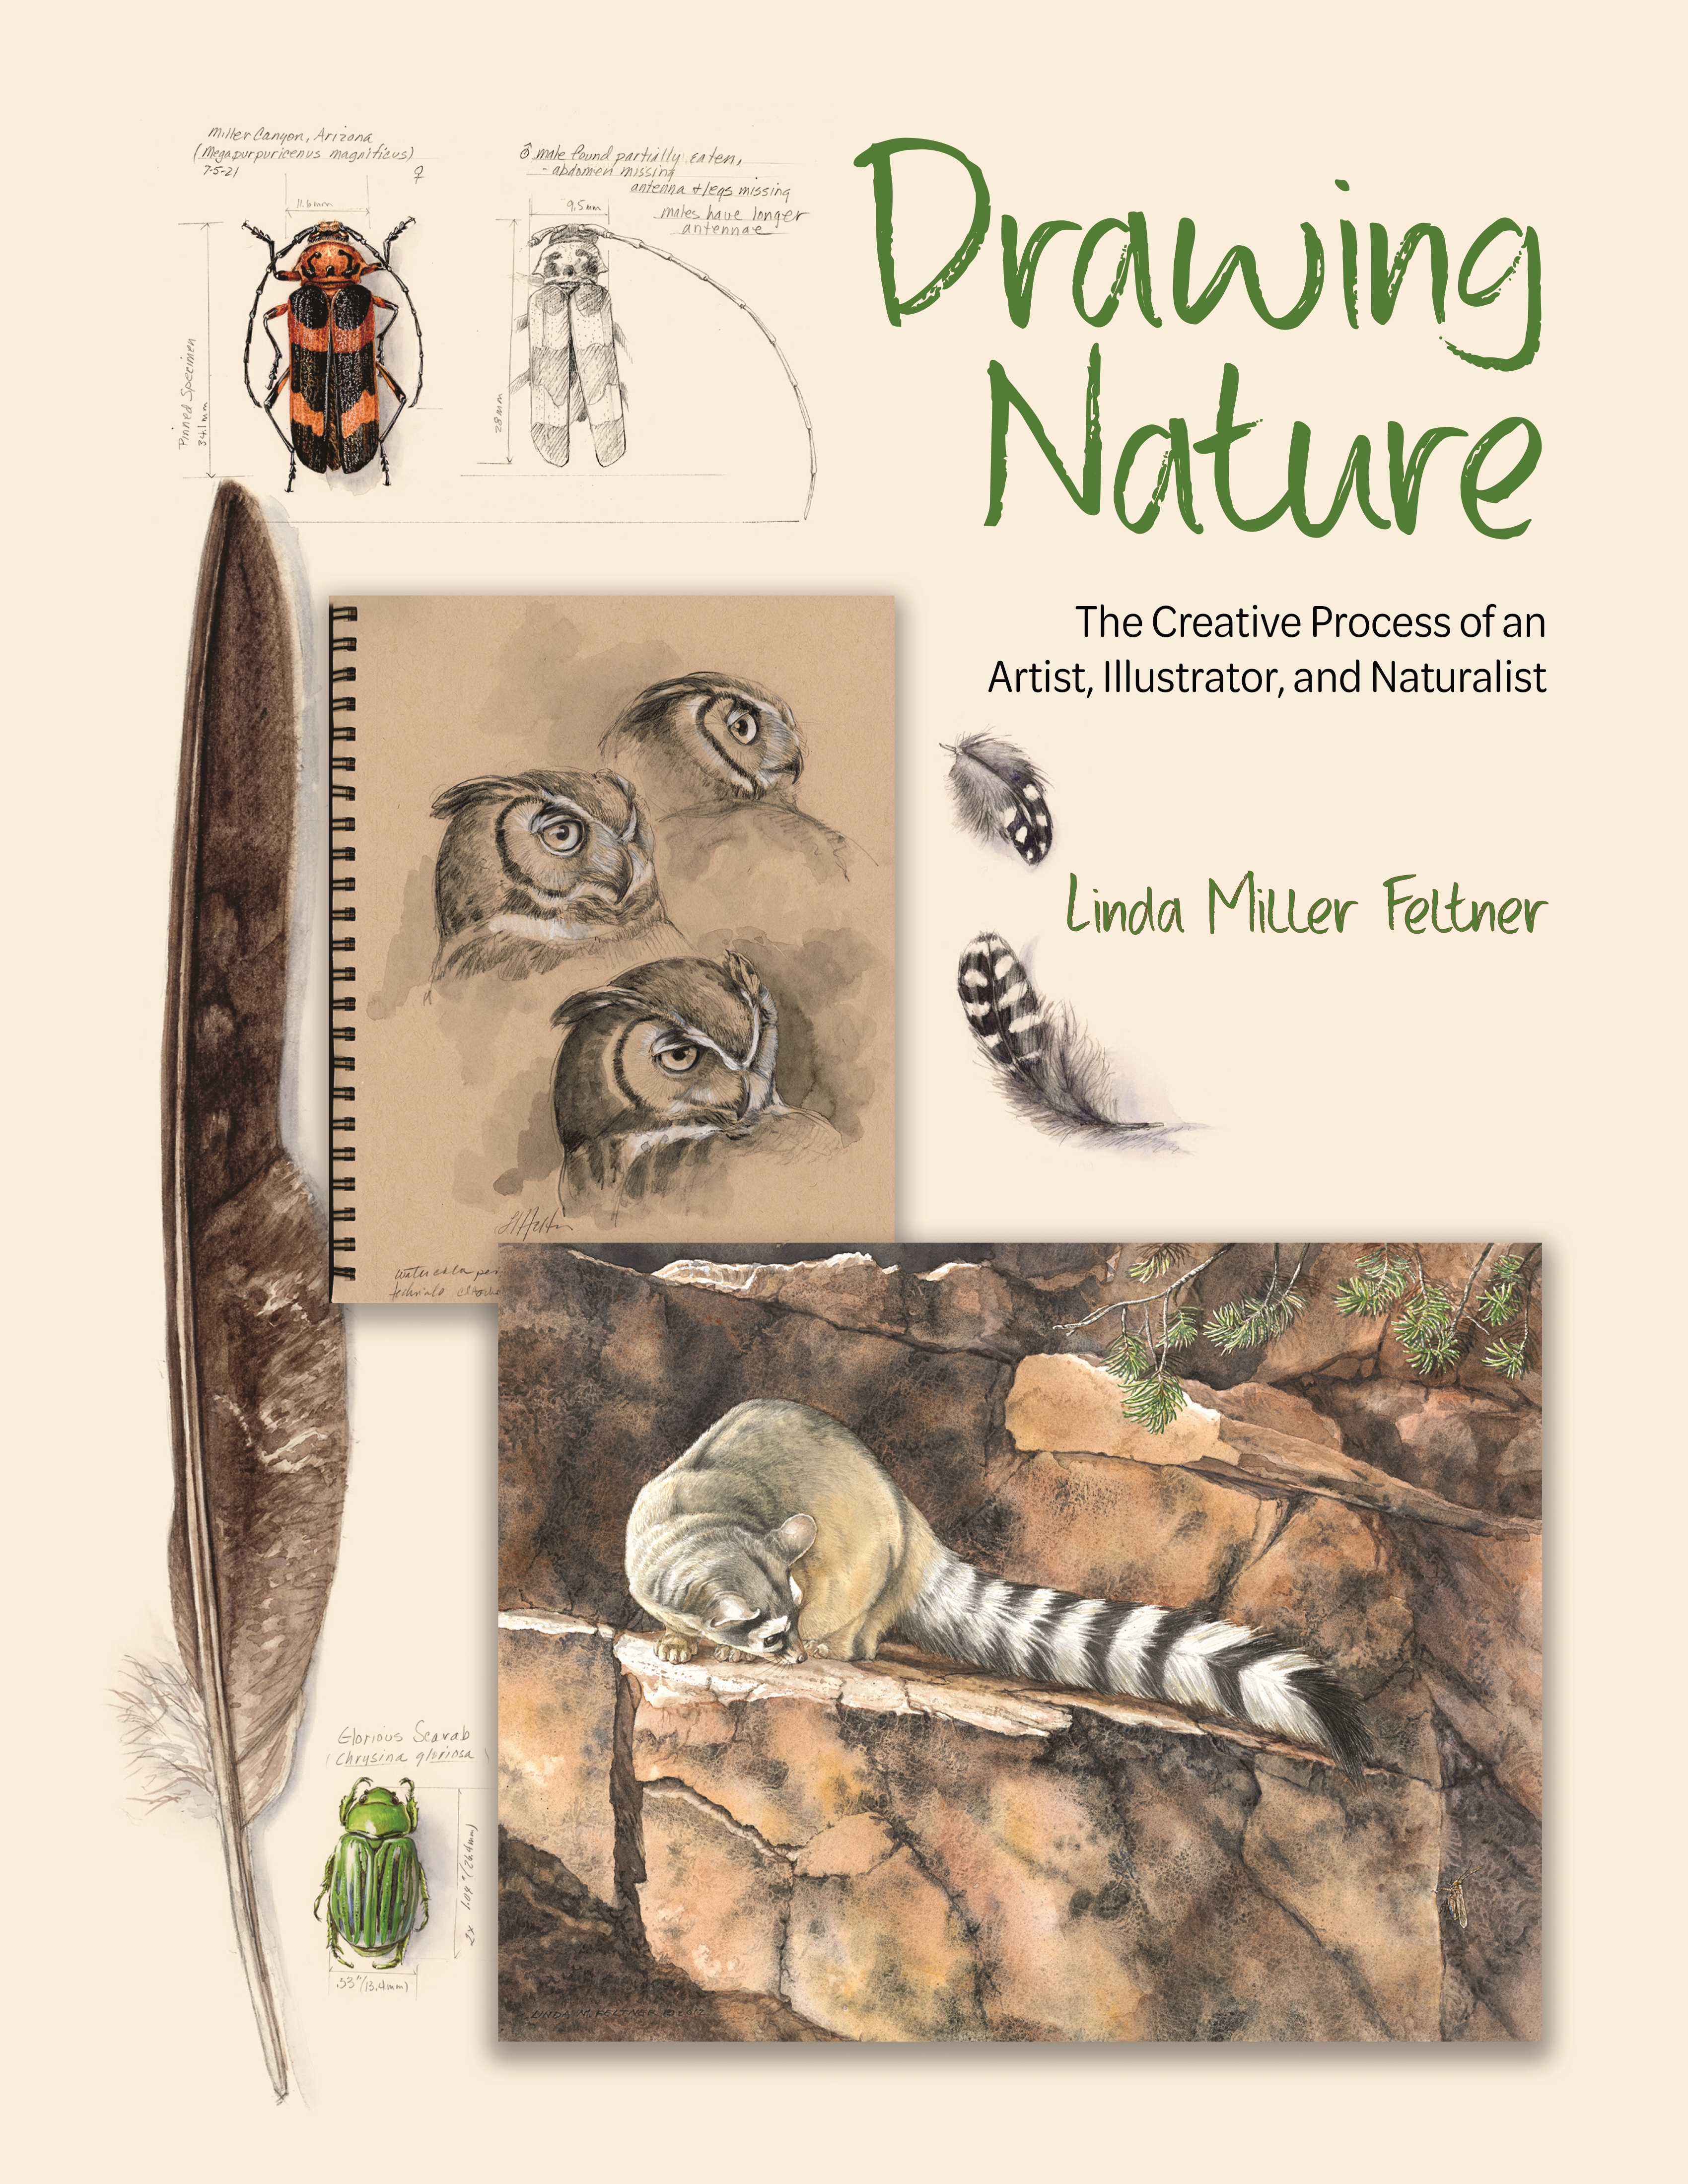 Easy Nature Drawing with Pencil